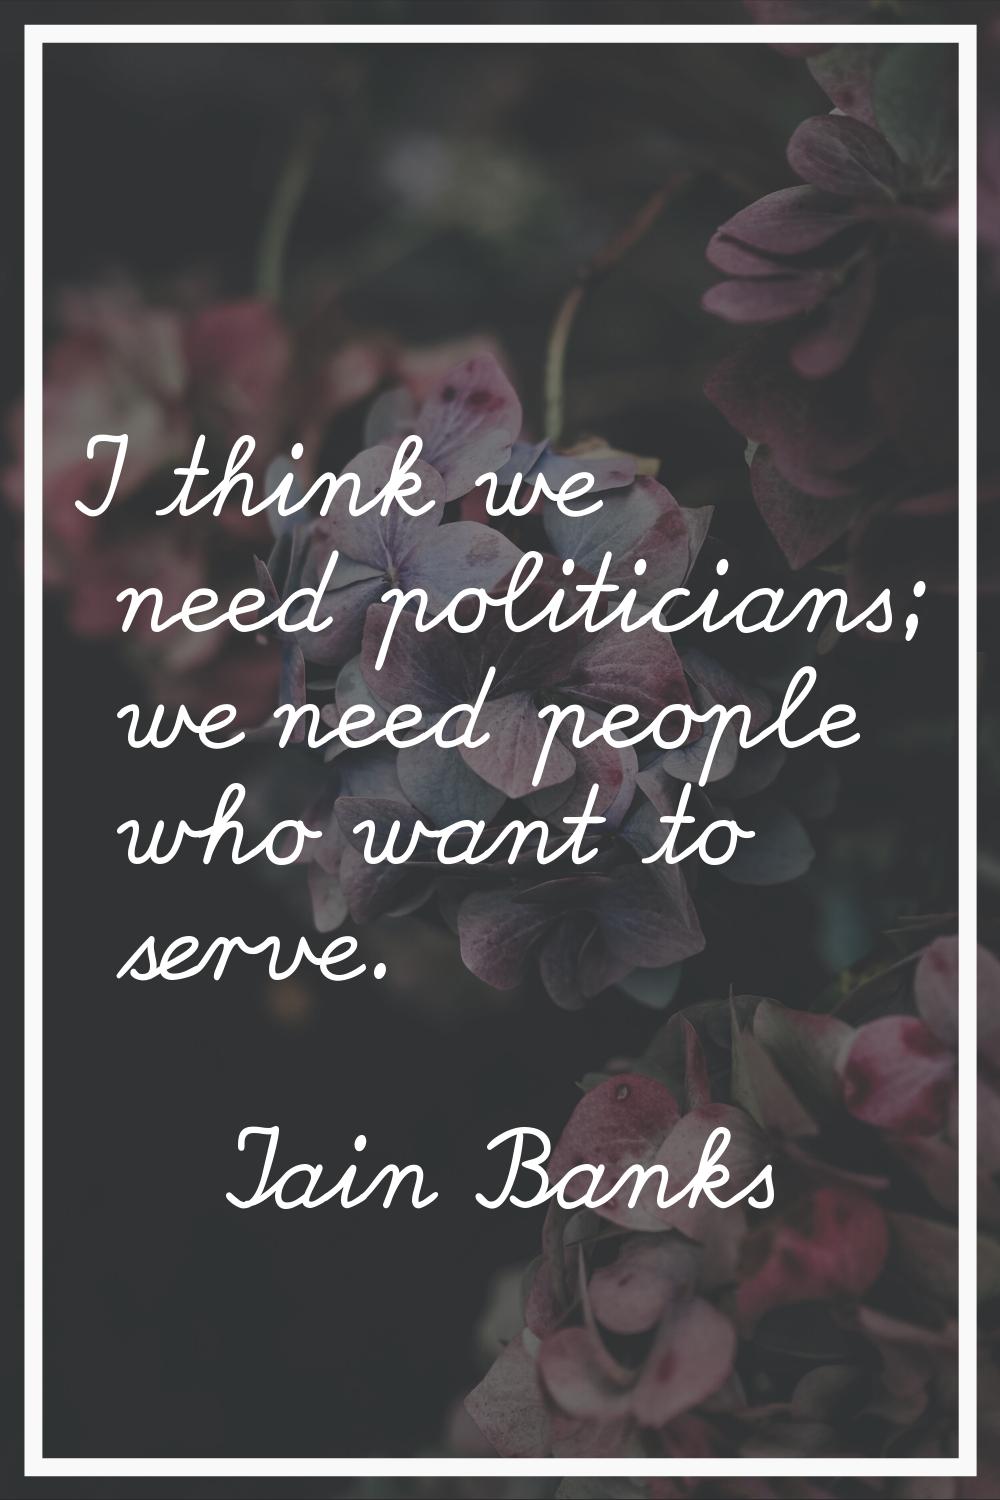 I think we need politicians; we need people who want to serve.